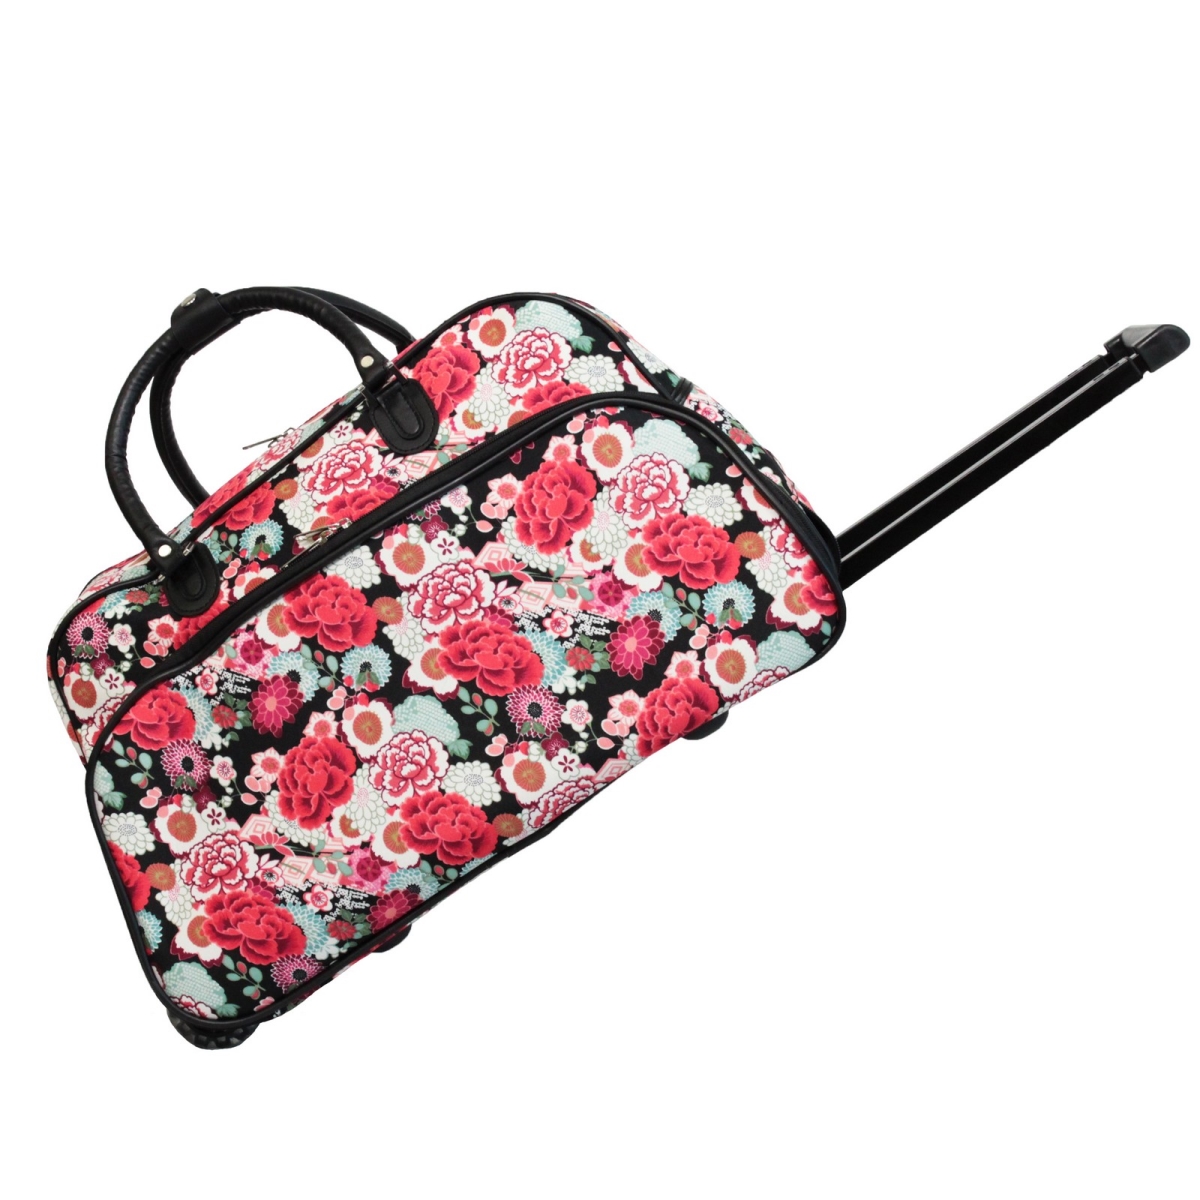 8112022-193 21 In. Carry On Rolling Duffle Bag - Flowers